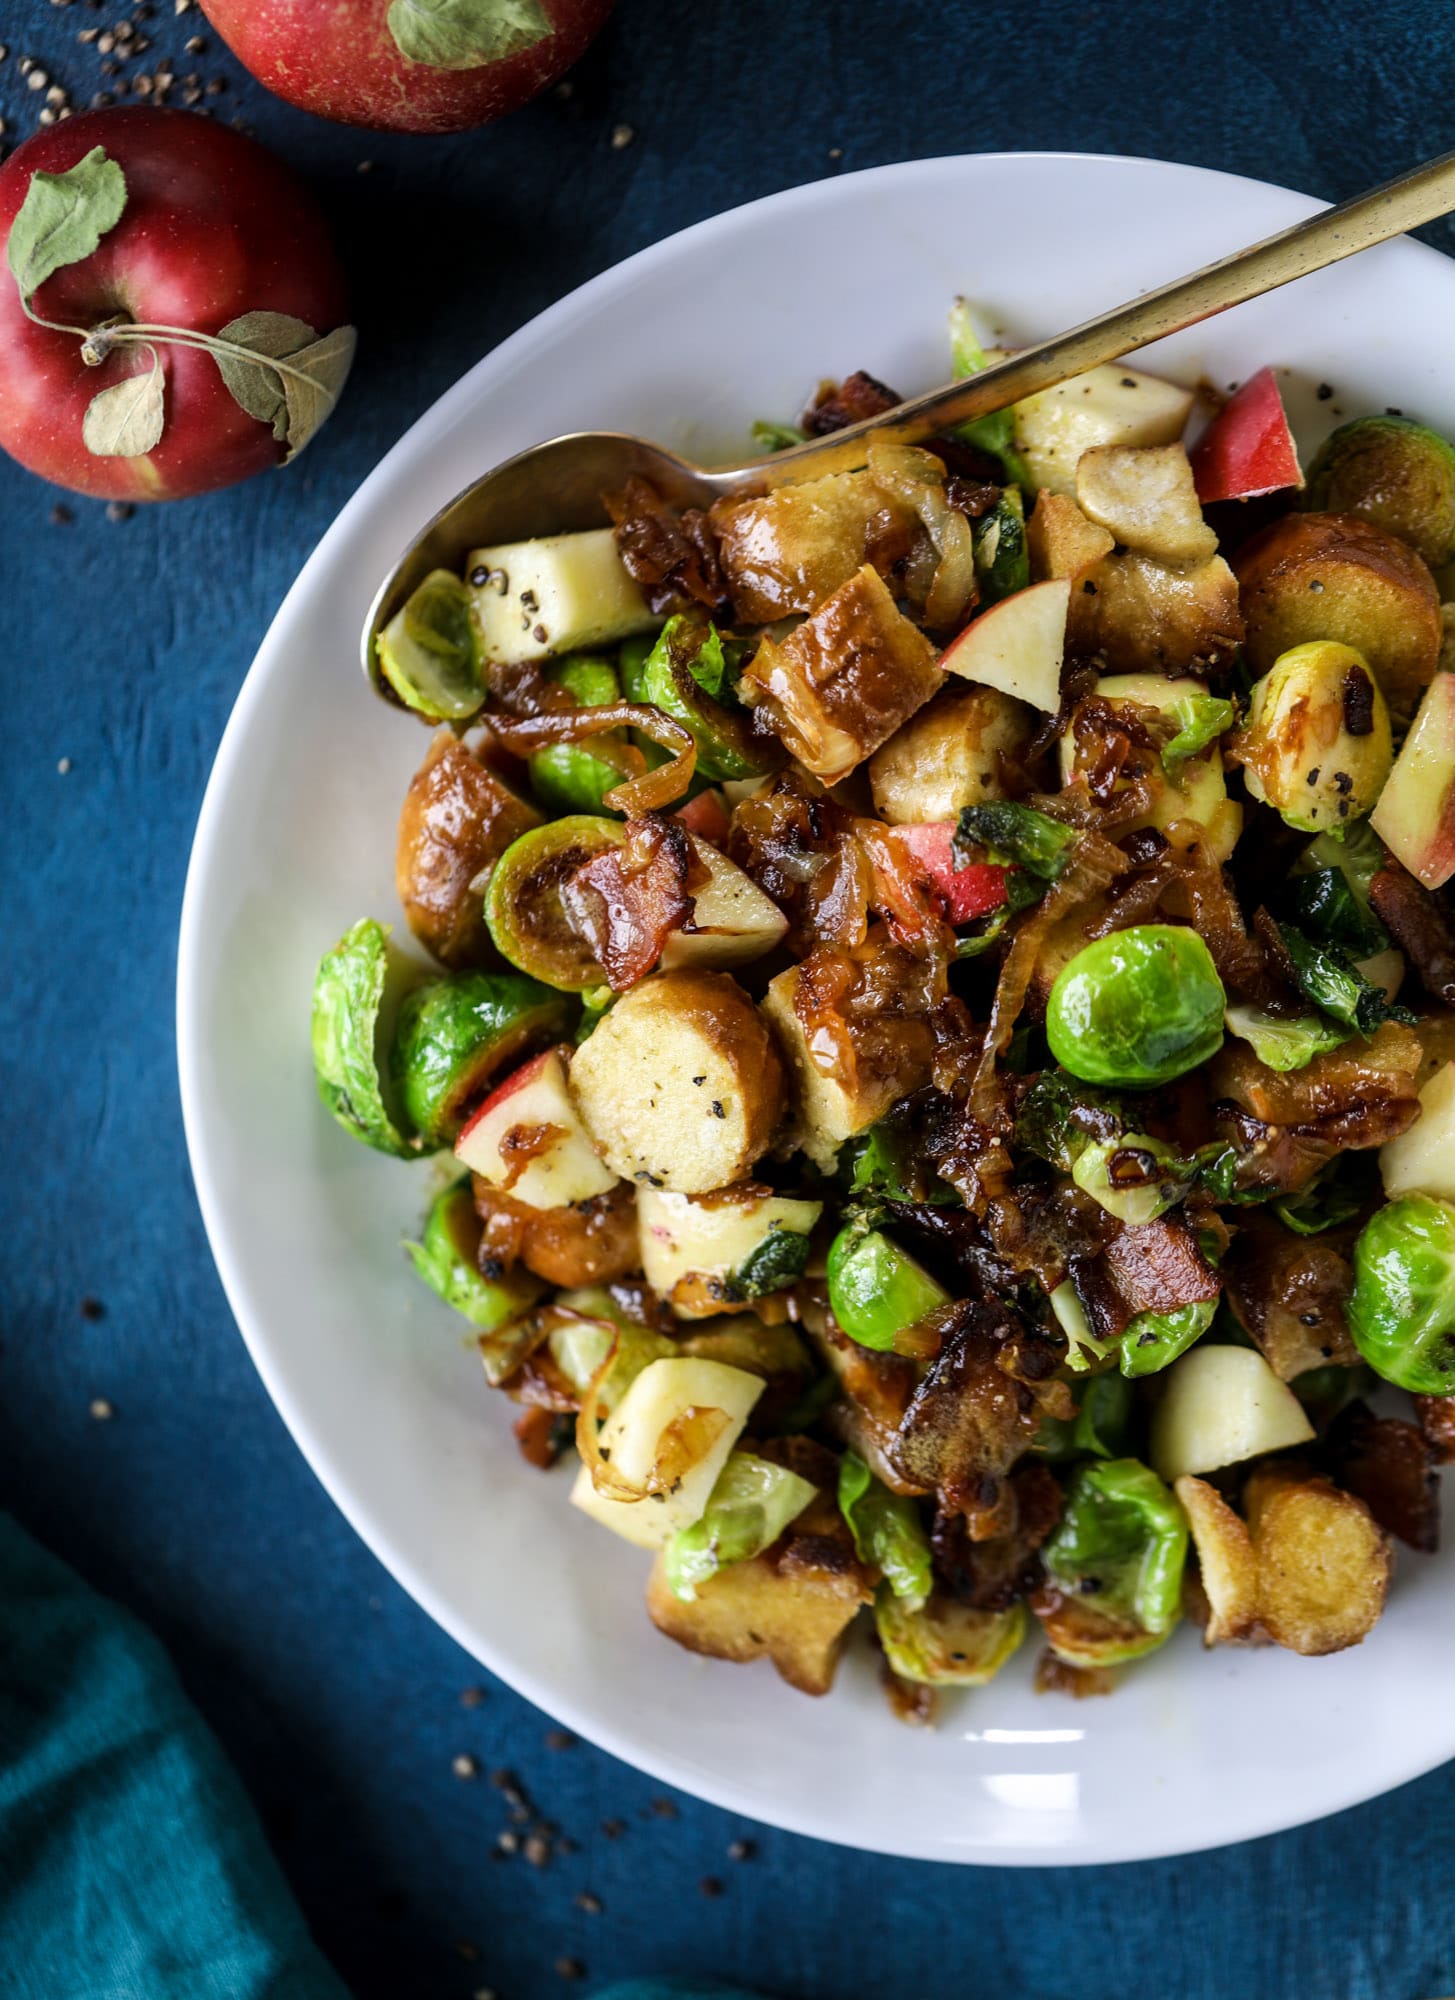 This soft pretzel panzanella with mustard vinaigrette is the best flavor combination for a fall salad there is! Crispy bacon, brussels sprouts, caramelized onion and chopped apple comes together to make for a satisfying delicious autumn salad. I howsweeteats.com #soft #pretzel #panzanella #mustard #apple #brusselssprouts